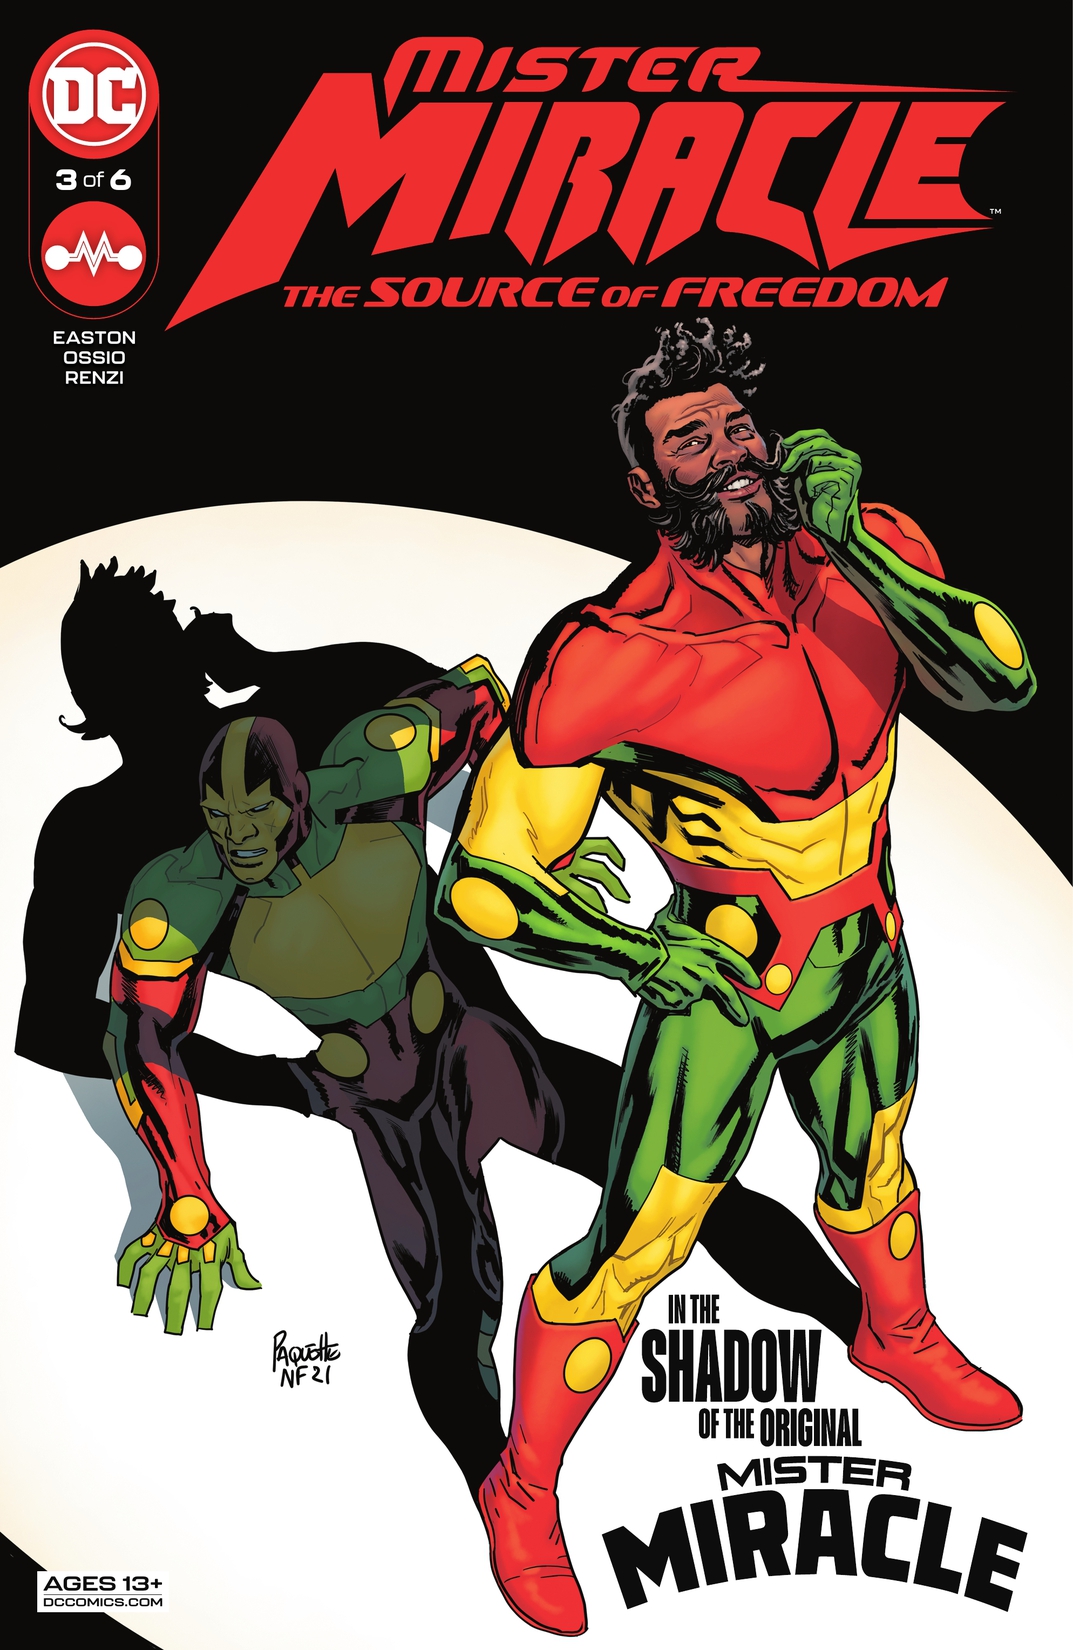 Mister Miracle: The Source of Freedom #3 preview images